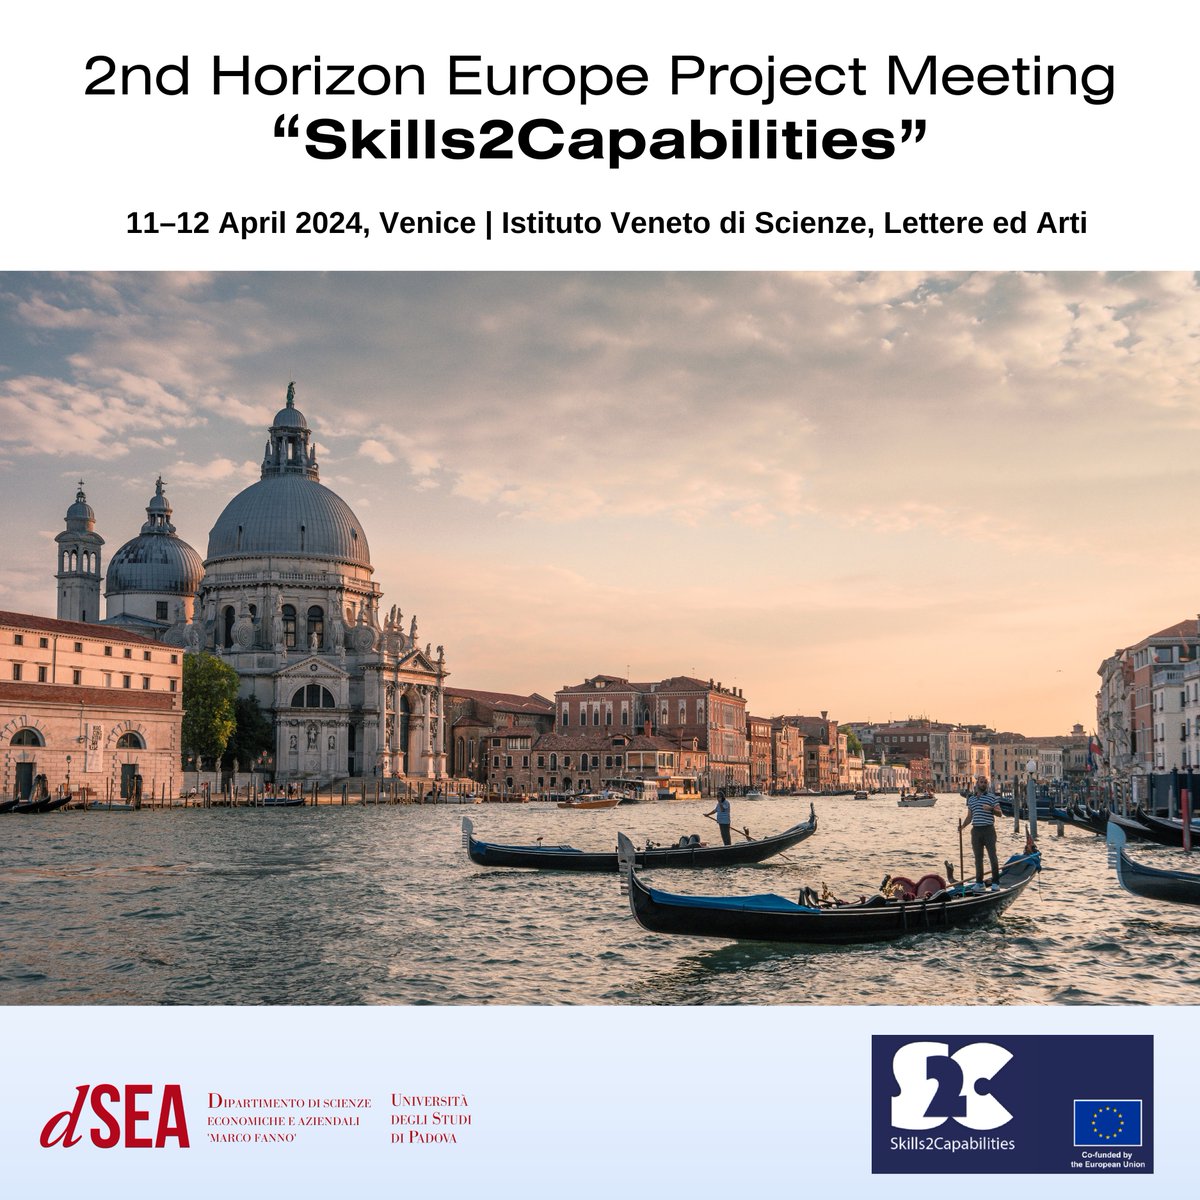 📌The workshop of the international network 'Skills2Capabilities', funded by the European Commission's Horizon Europe scheme, will take place @IstitutoVeneto in Venice on 11-12 April. 🗣️Keynotes by @Sandra_McNally & @GiuliaSantange5 👉Full program here unipd.link/Skills2capabil…